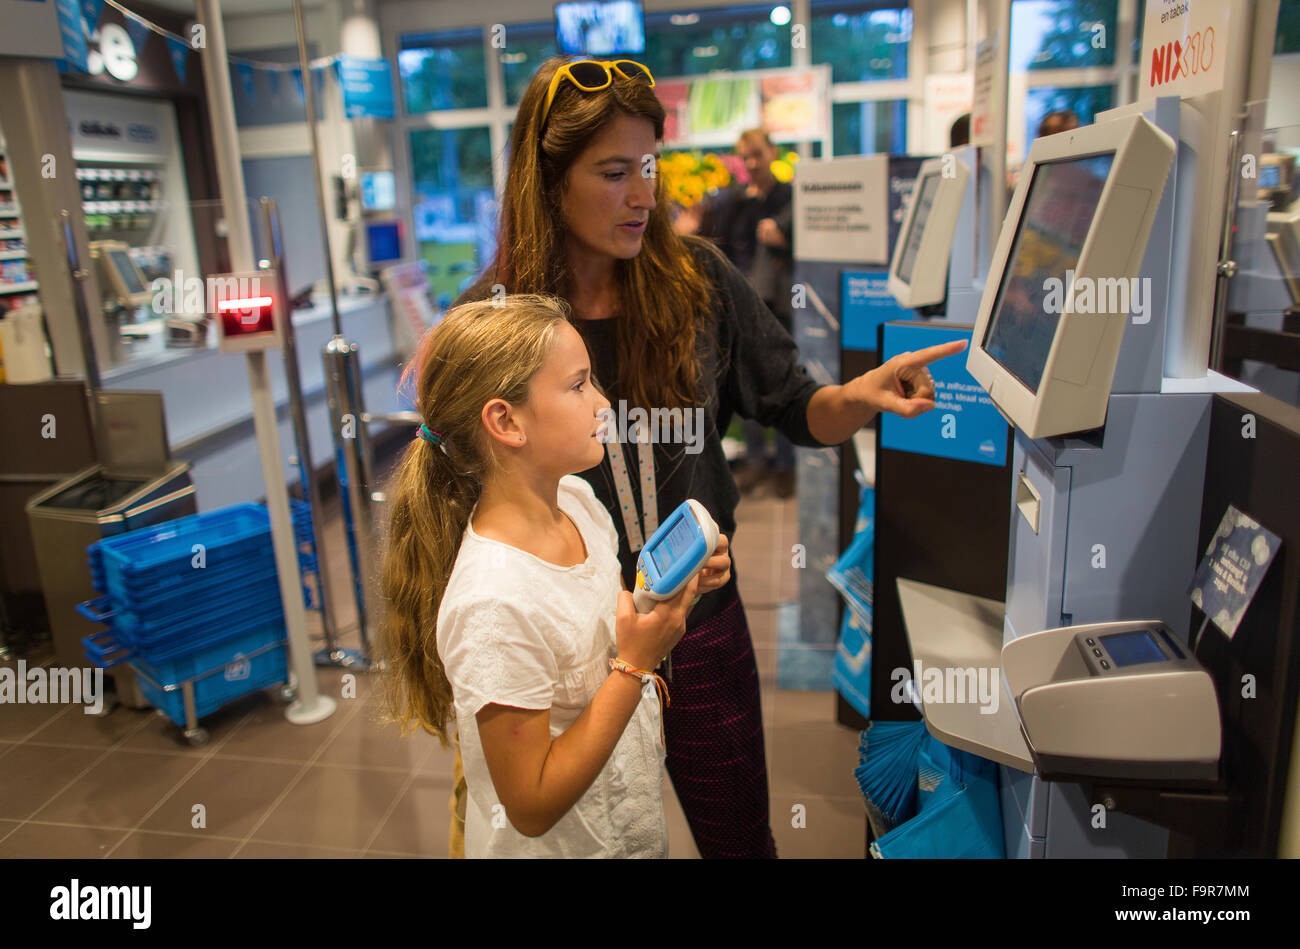 The first Albert Heijn supermarket without cashiers and where only can be paid via selfscan Stock Photo